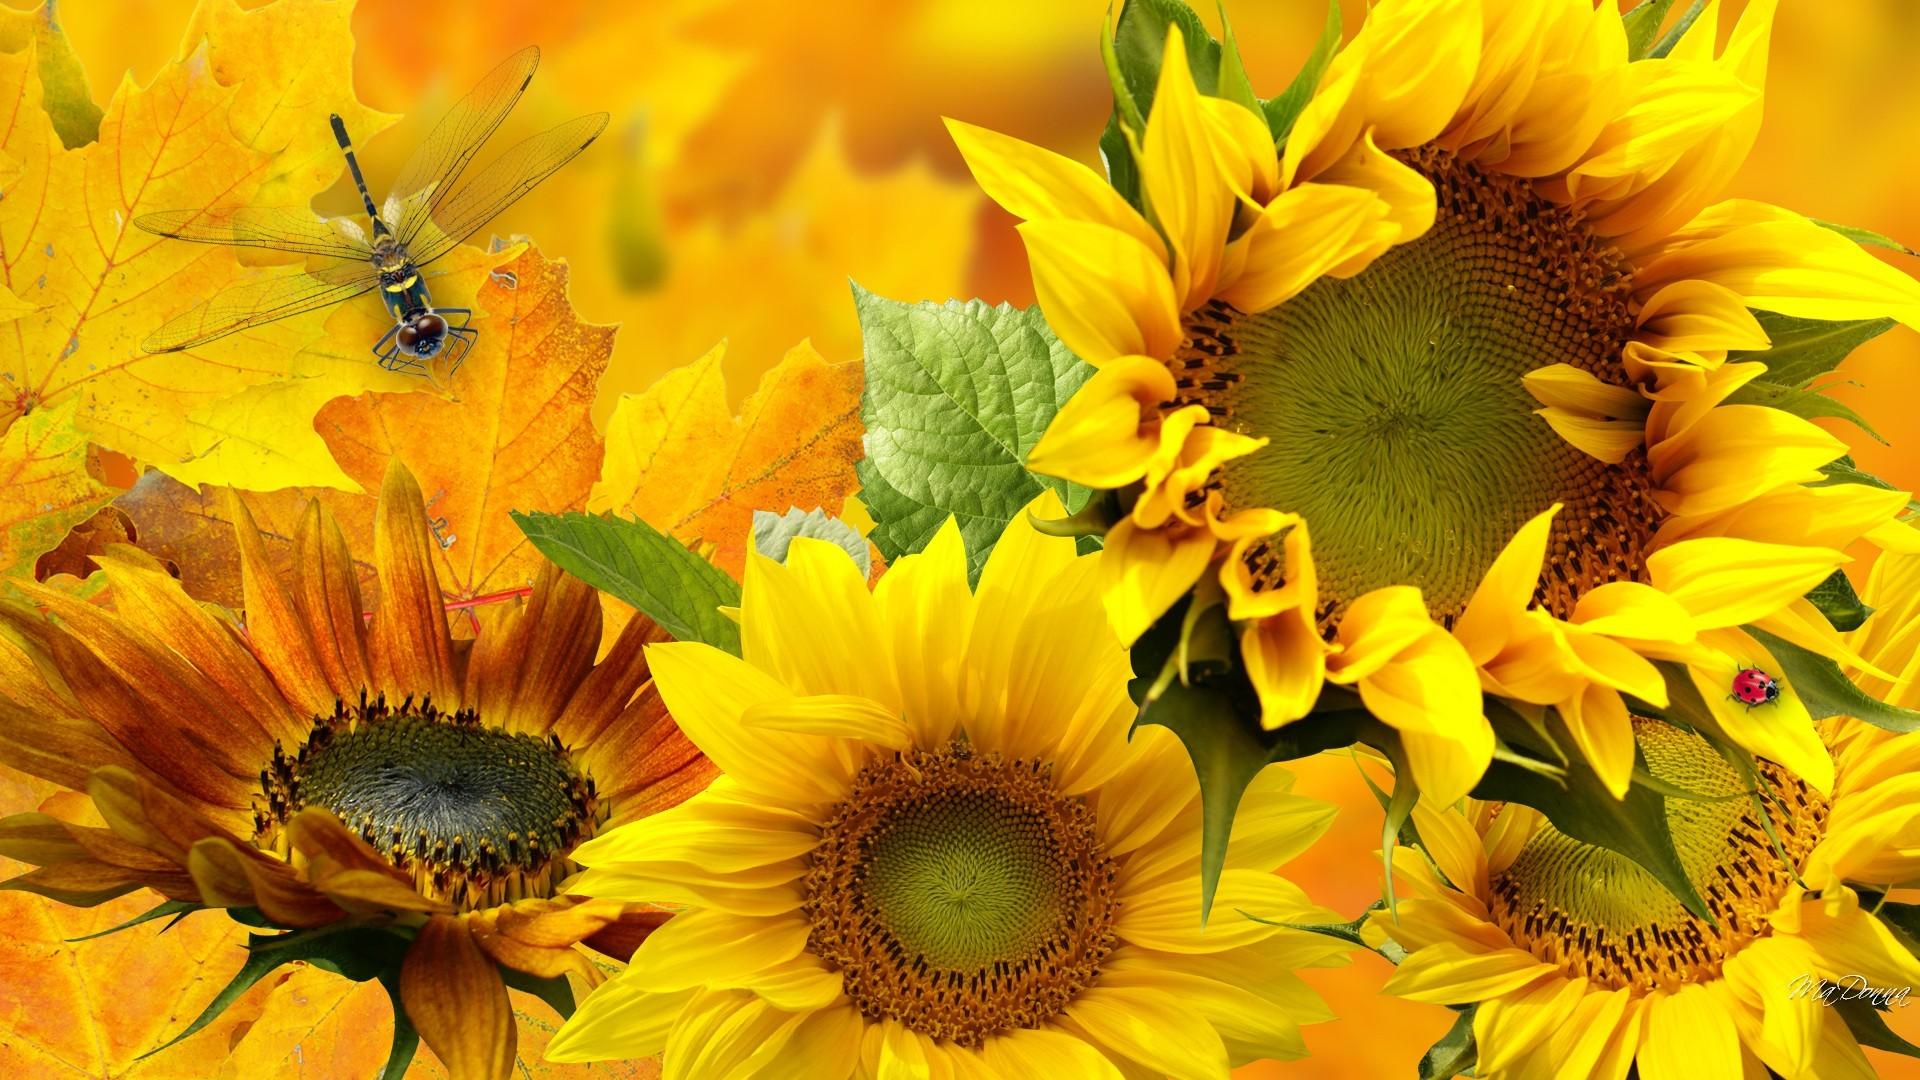 Sunflowers and Dragonfly HD Wallpaper. Background Image